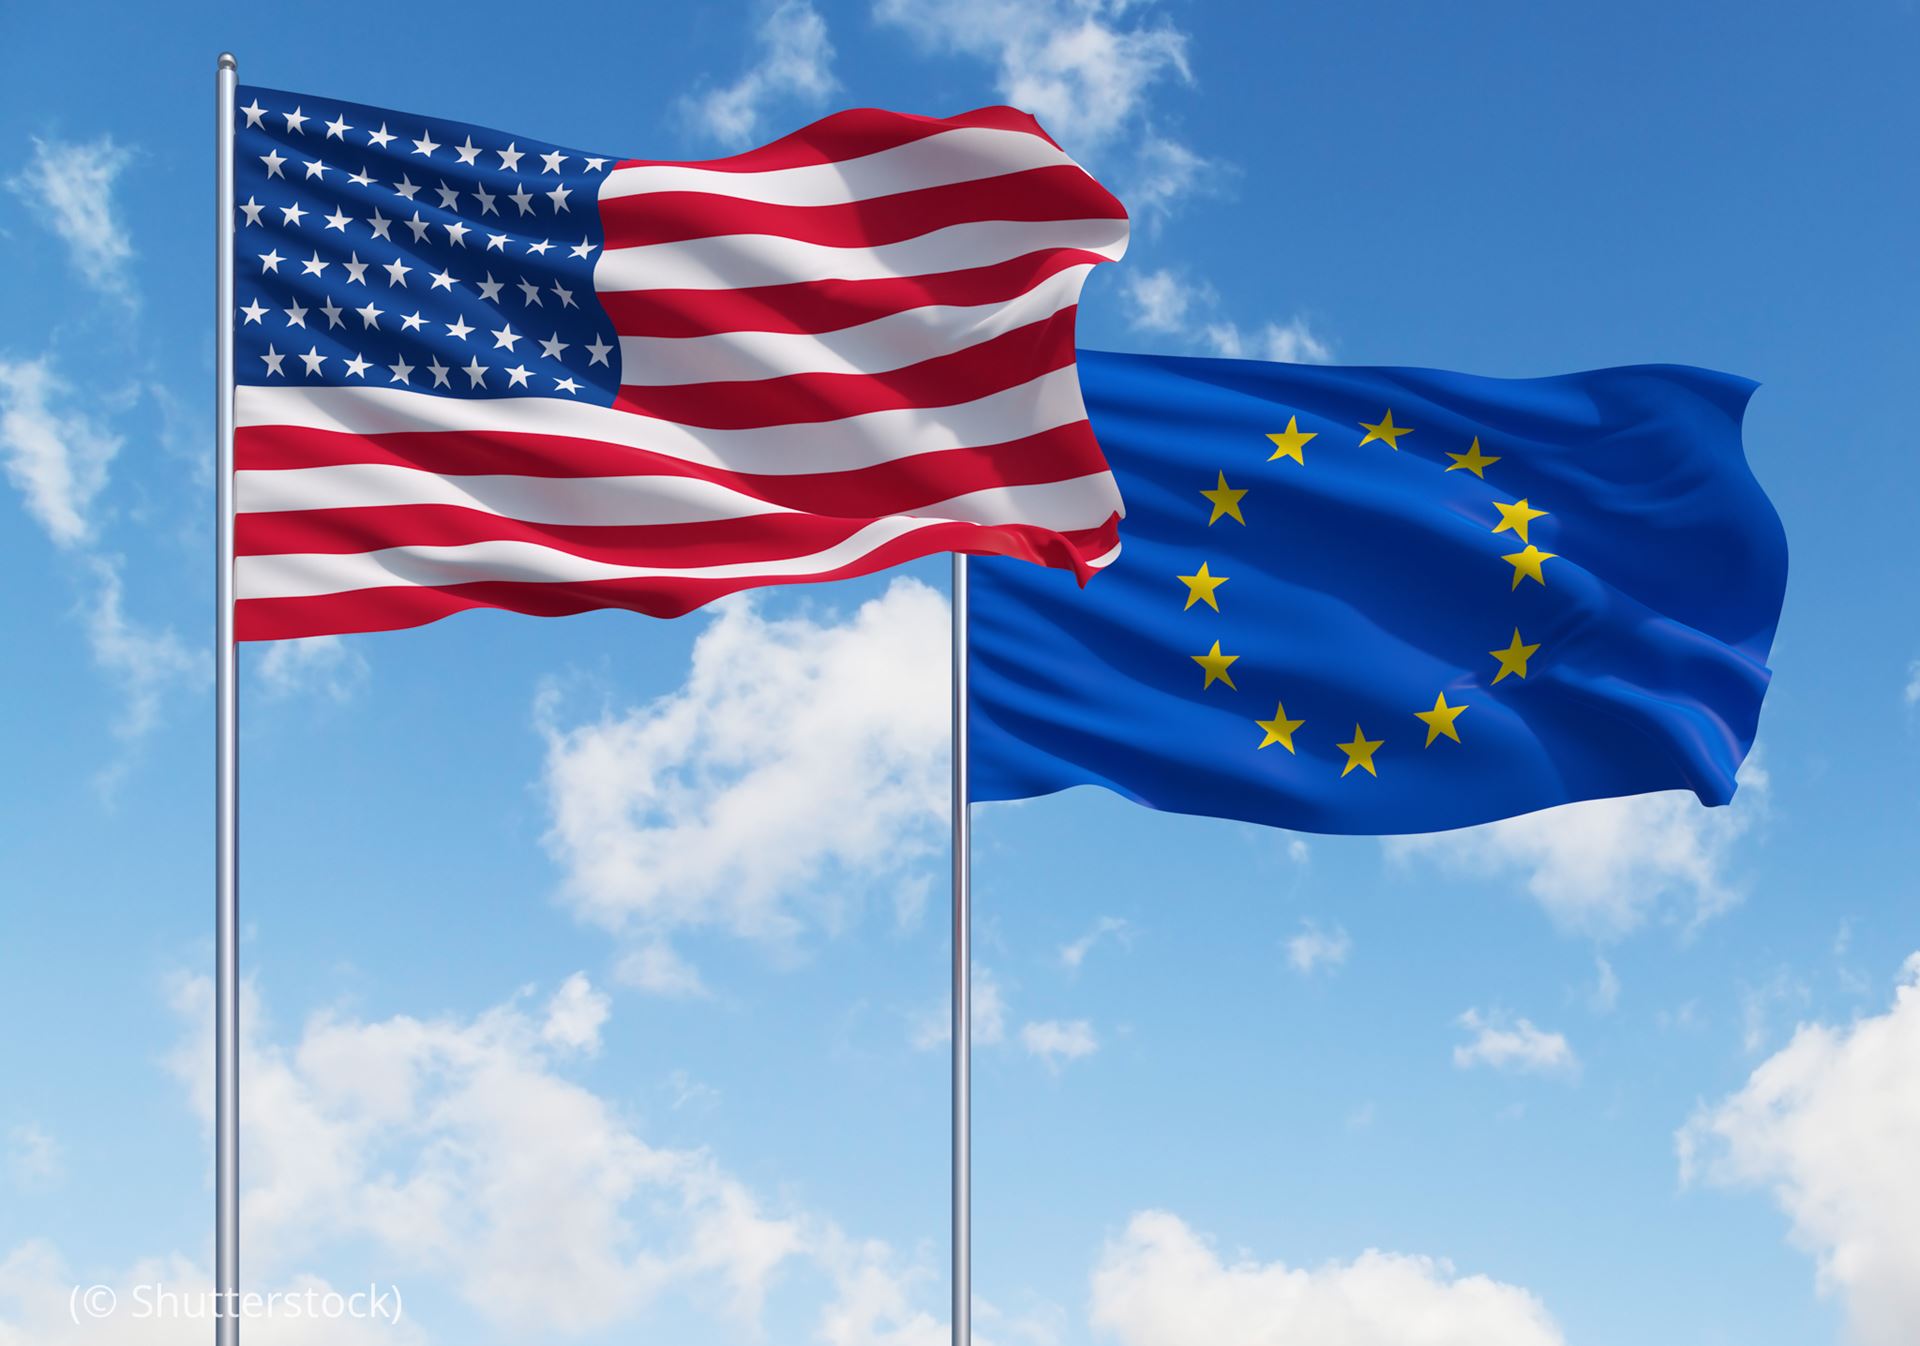 US and EU negotiate on steel trade terms